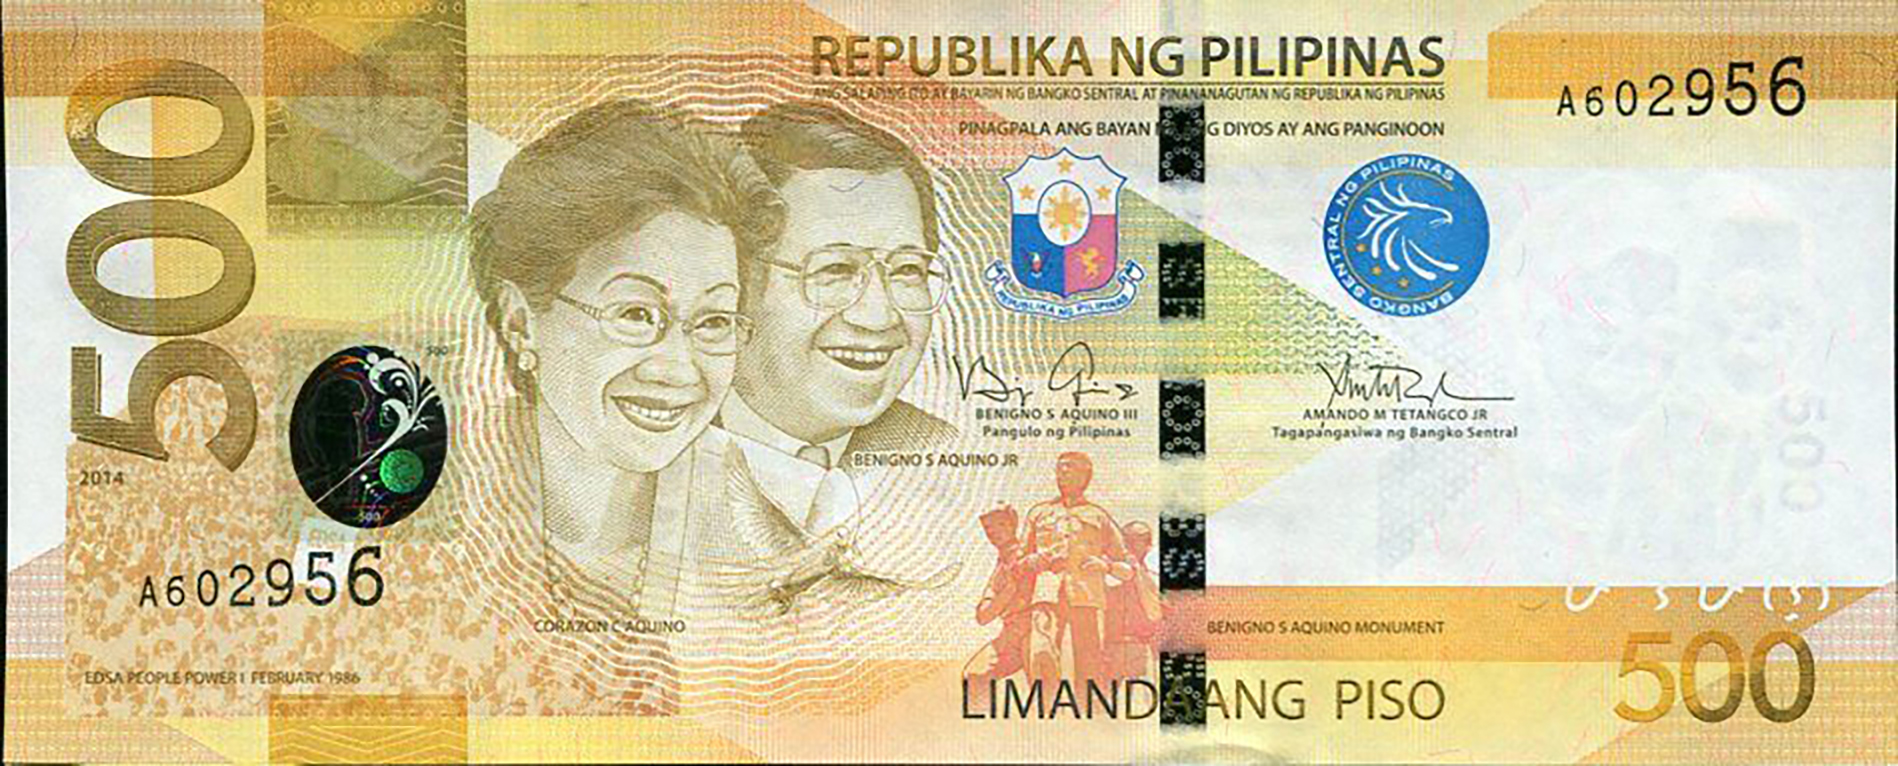 Philippines new date (2014) 500-peso note (B1082d) confirmed – BanknoteNews